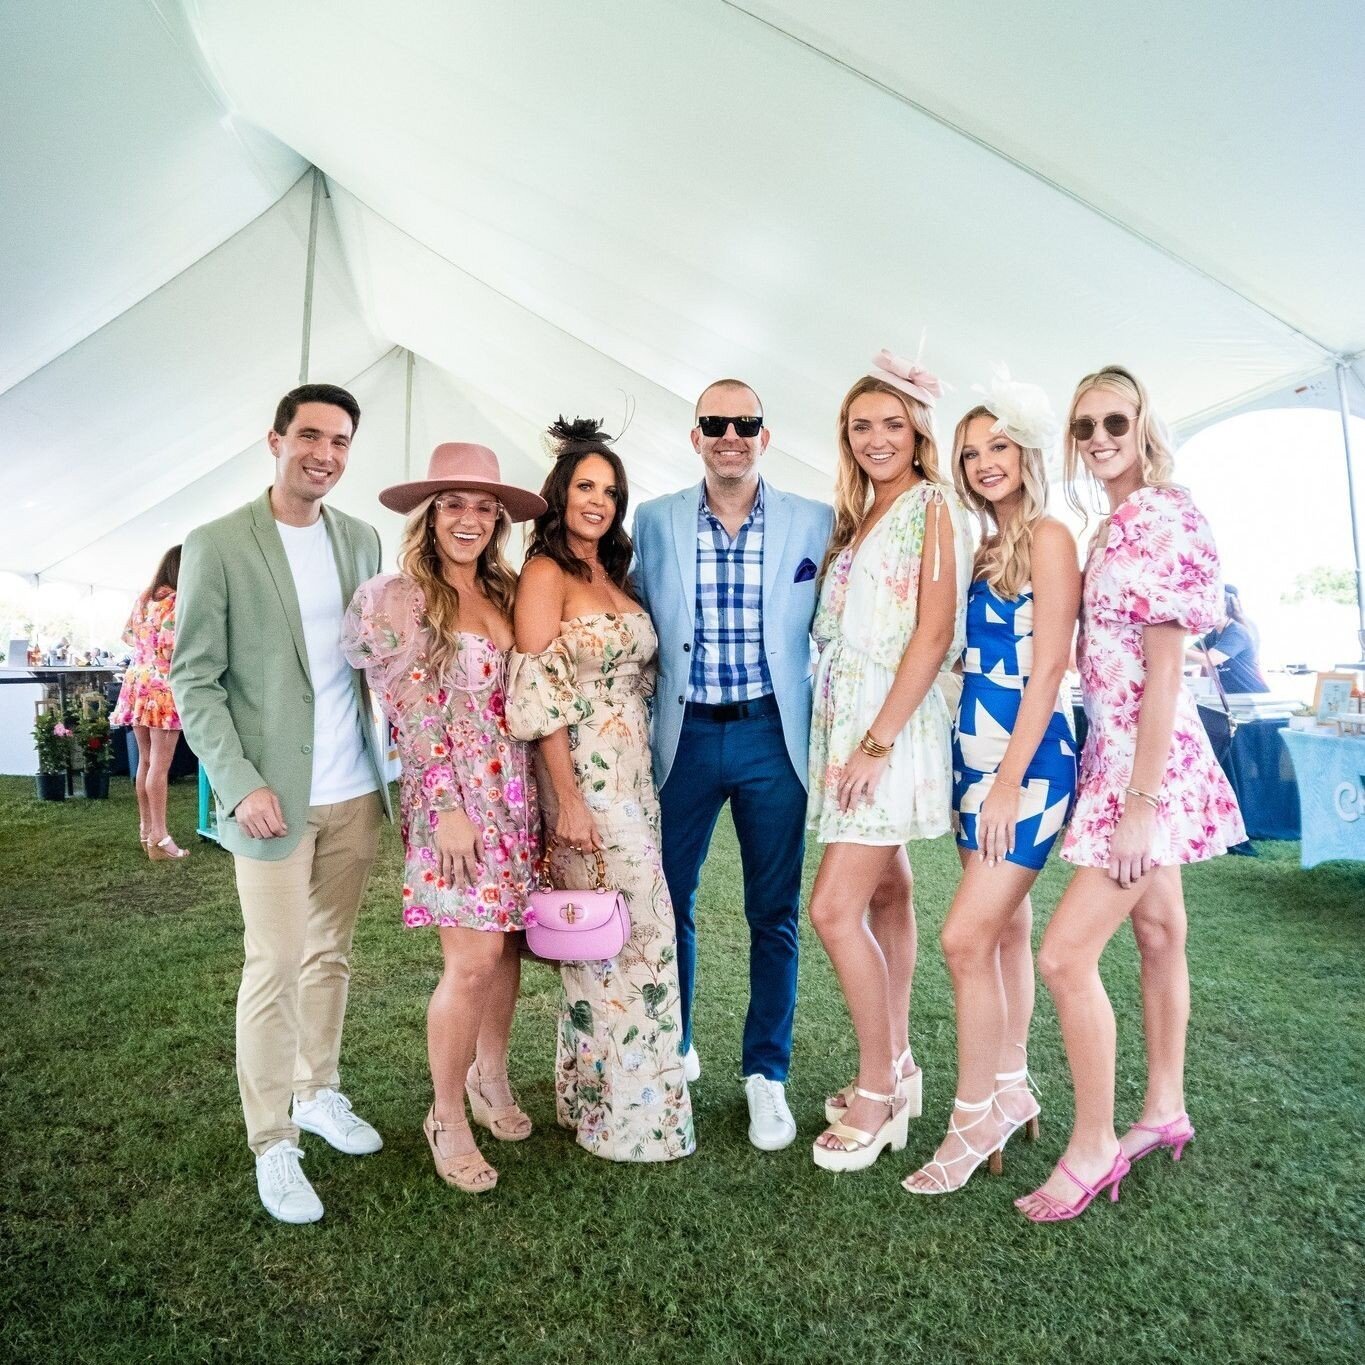 This year's 12th Annual @morganautogroup Charity Polo Classic presented by @coxautomotive is getting &quot;bad &amp; boozie&quot; with Prosecco and Popsicles by @booziepopshop, brought you SKDG.⁠
⁠
⁠
.⁠
.⁠
.⁠
#tampanonprofit #tampacharity #charitypol